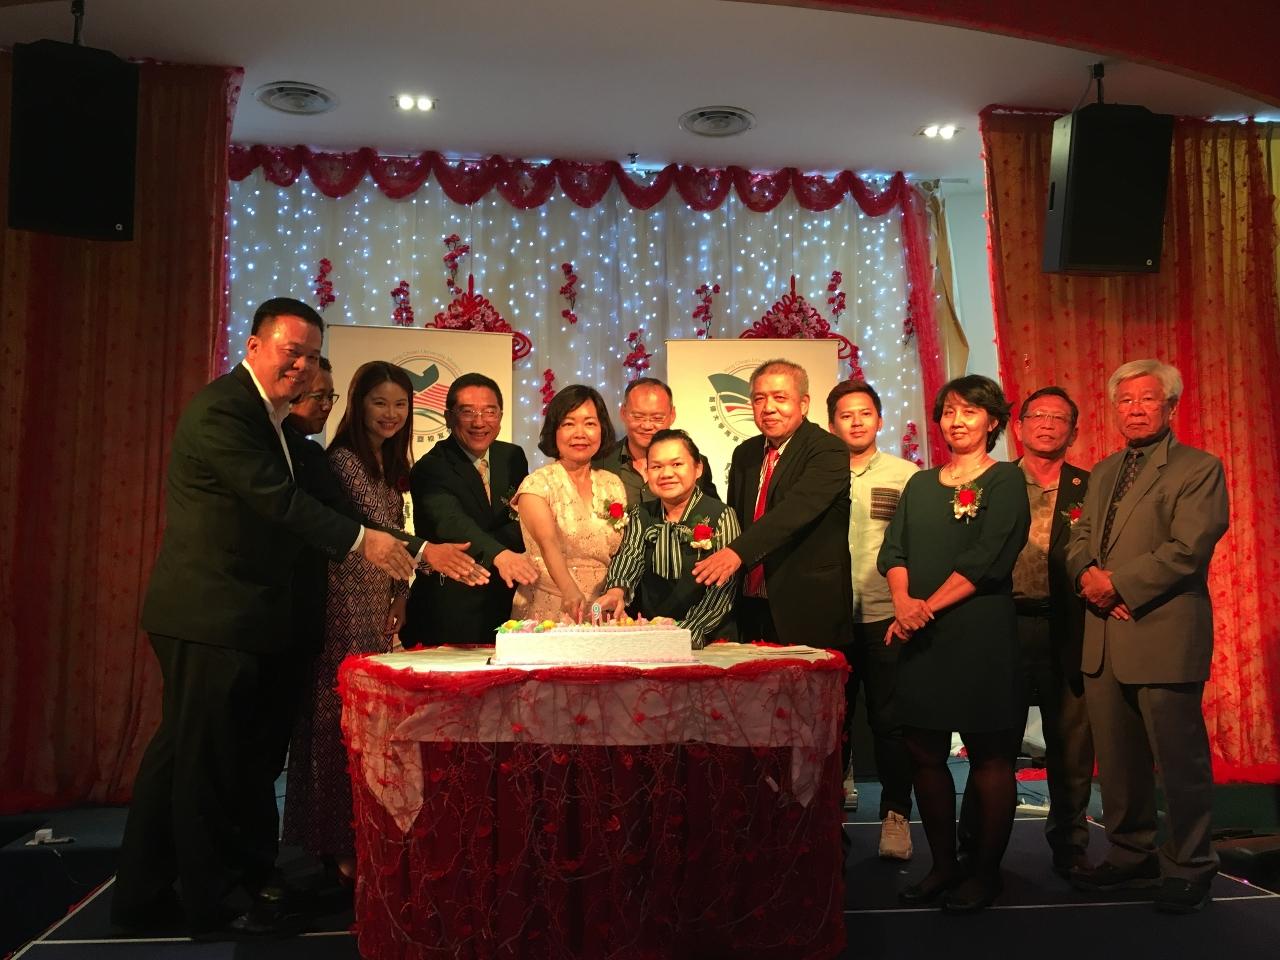 Representative Anne Hung (first row, fifth from left) cuts the cake with the distinguished guests to celebrate.